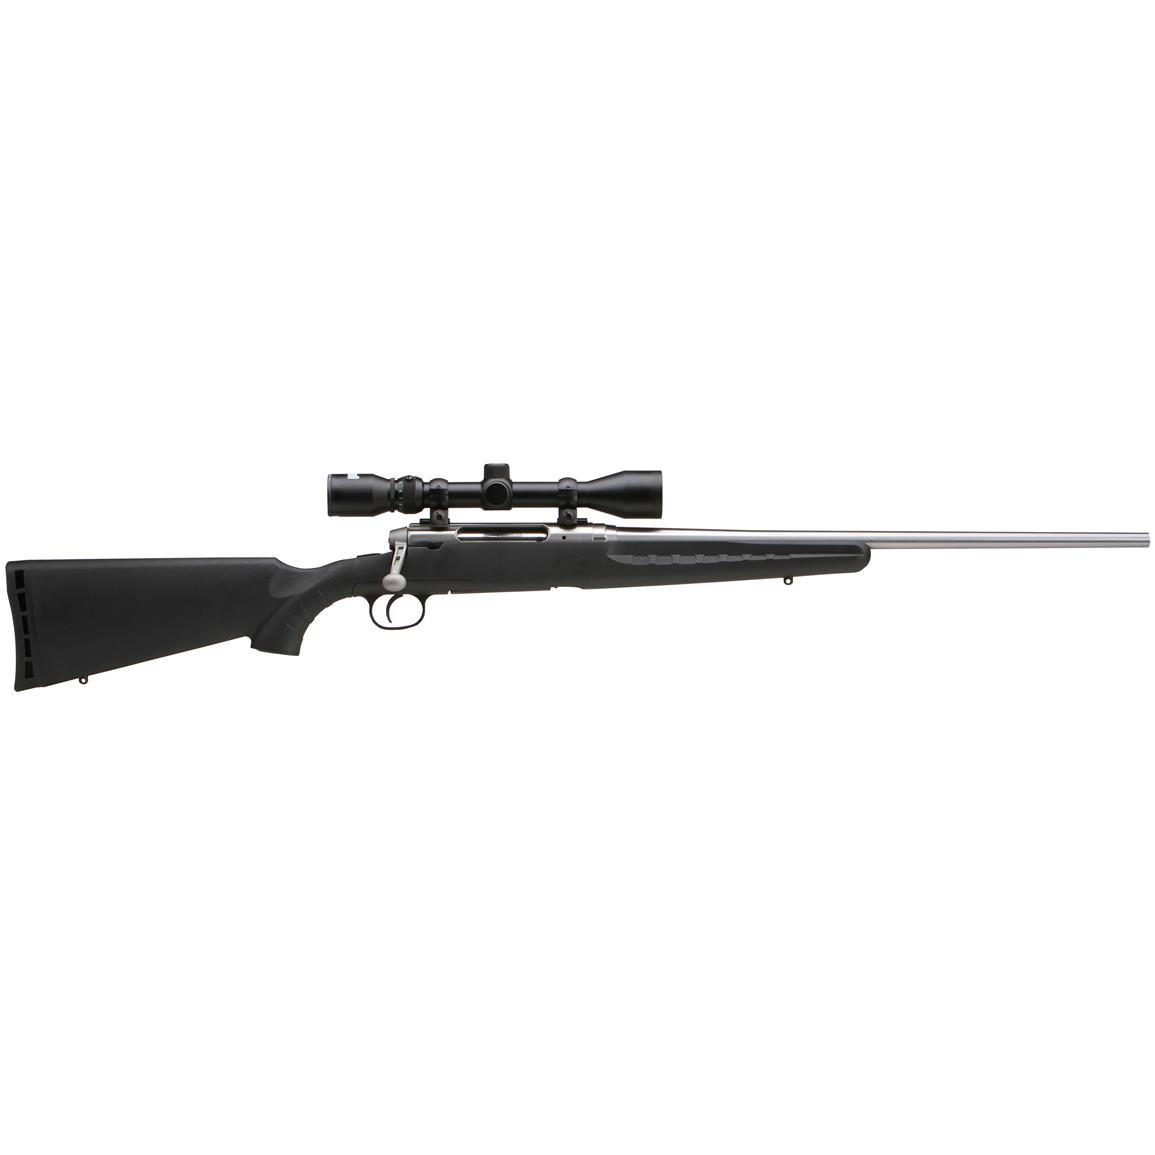 Savage Axis Stainless XP, Bolt Action, .22-250 Remington, 22" Barrel, 3-9x40 Scope, 4 1 Rounds